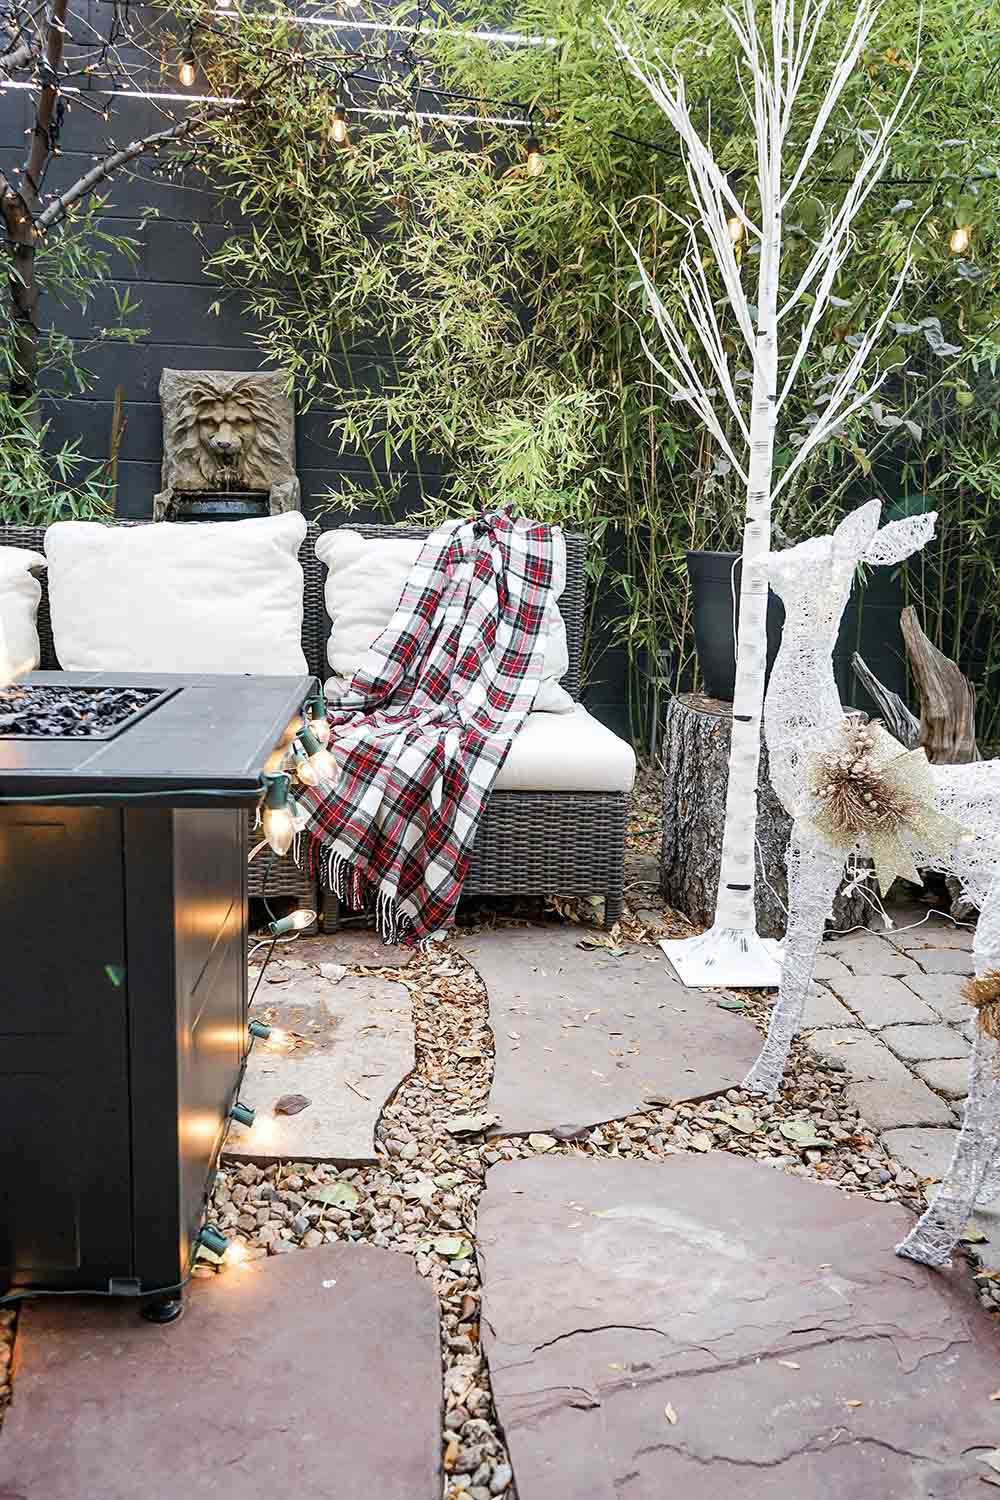 A small outdoor patio space decorated for the holidays with lights.